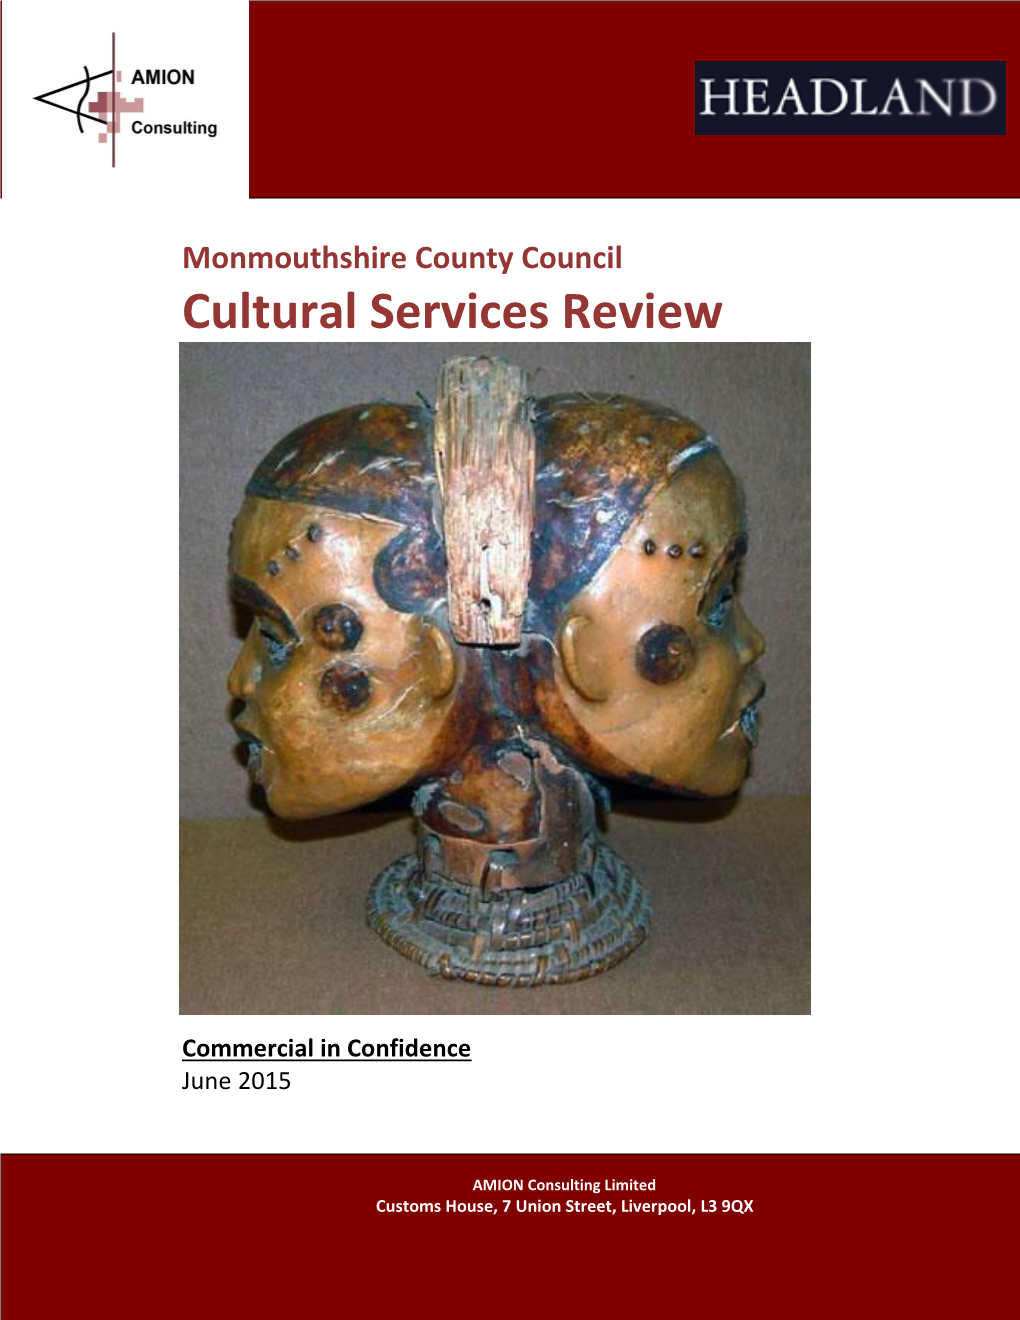 Monmouthshire County Council Cultural Services Review